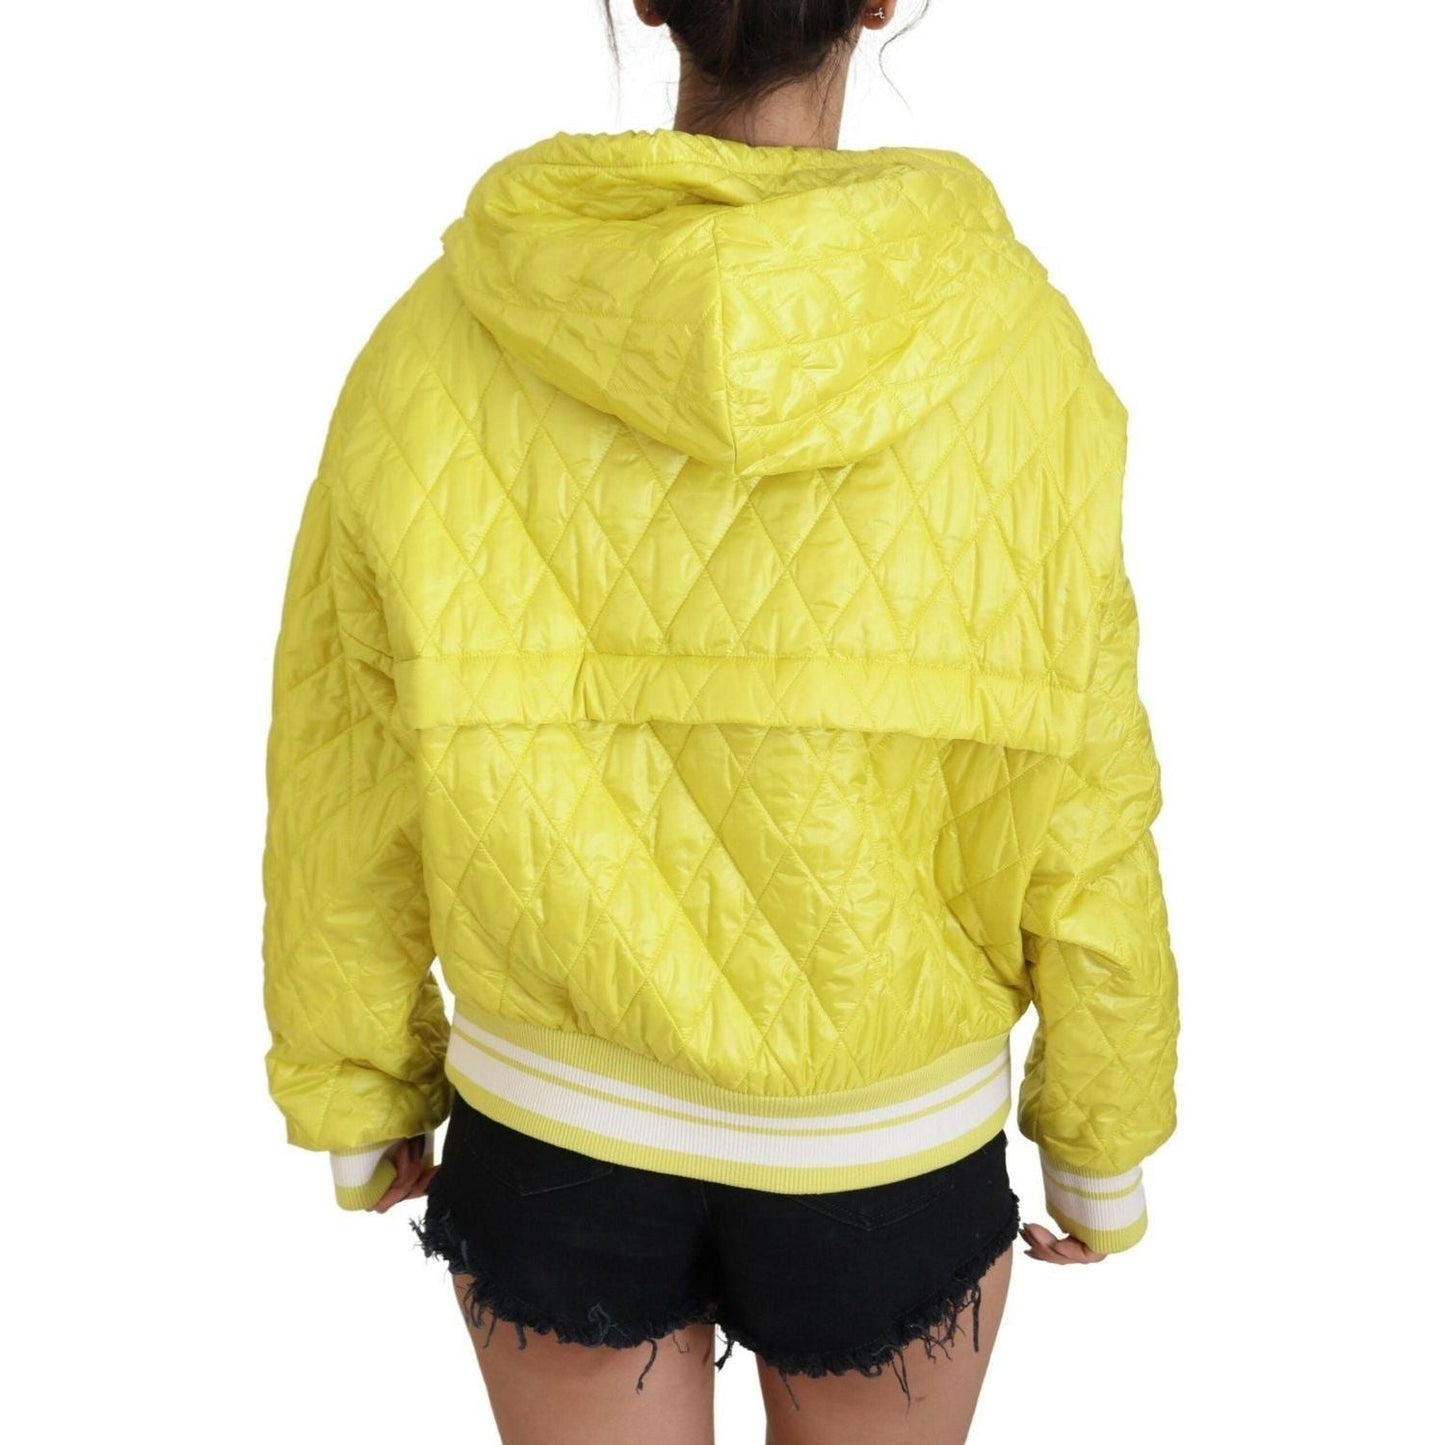 Dolce & Gabbana Elegant Yellow Hooded Jacket yellow-nylon-quilted-hooded-pullover-jacket IMG_2764-scaled-59a981a9-f79.jpg